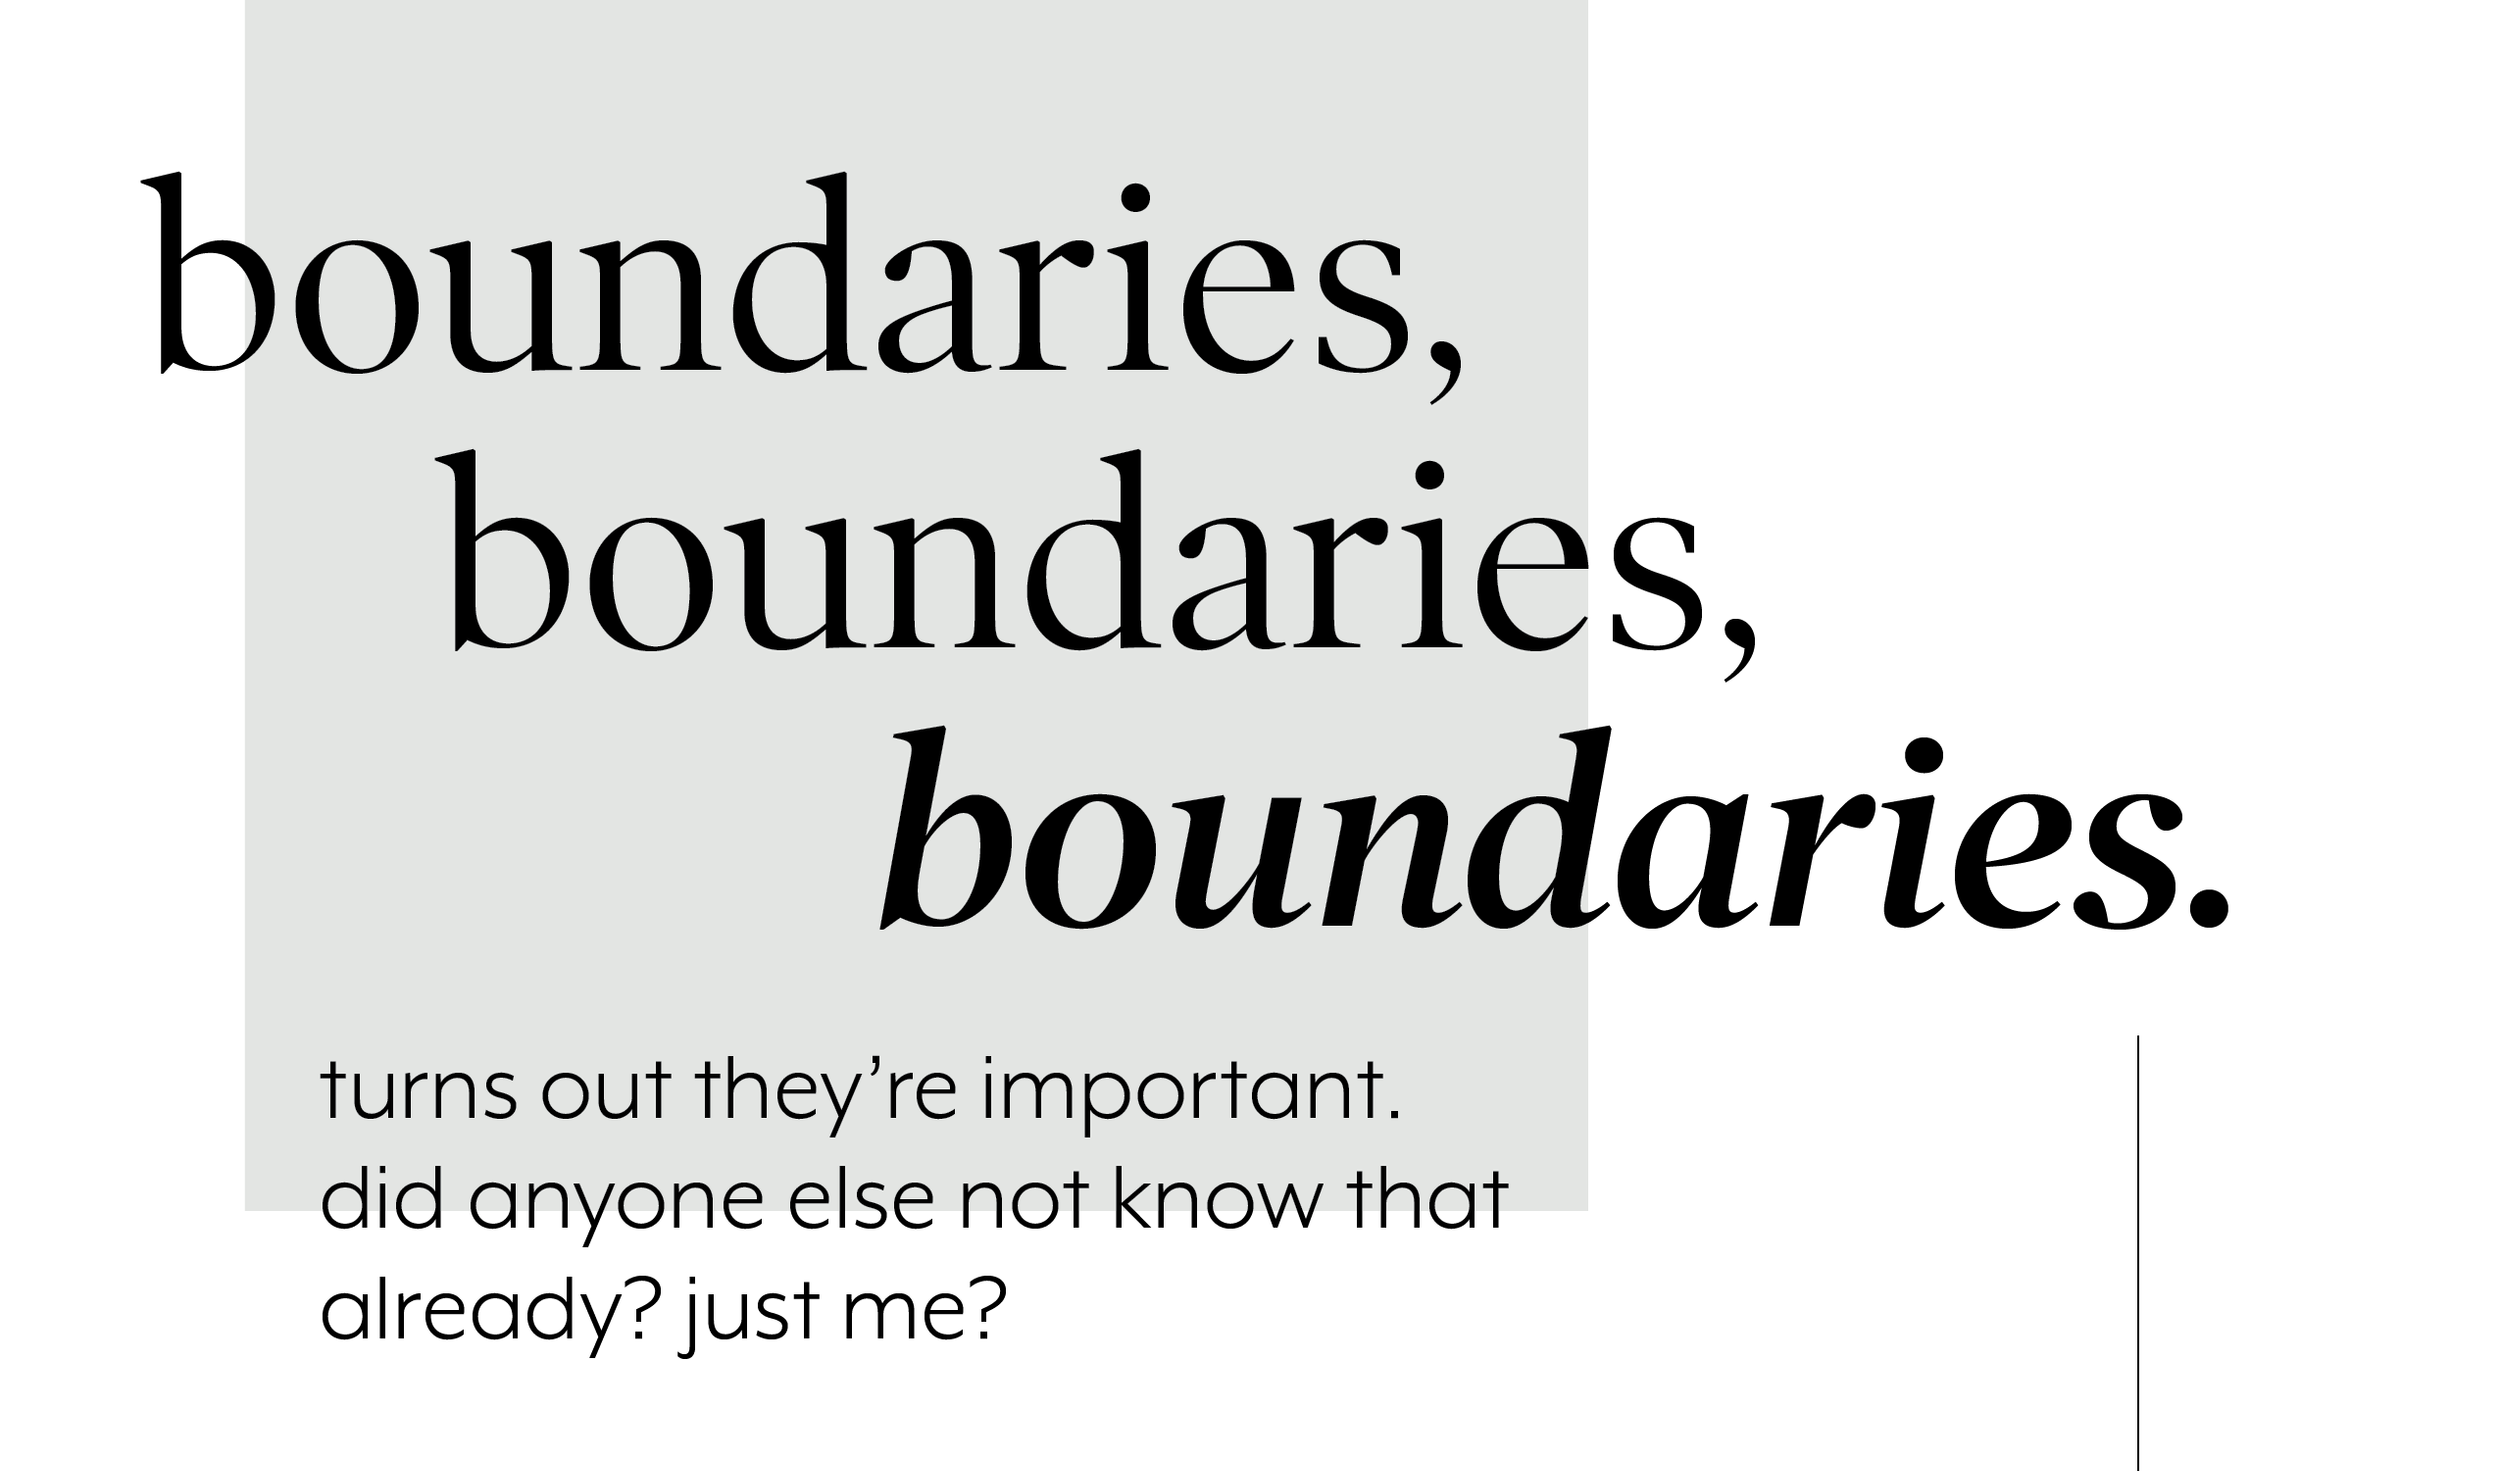 Setting boundaries (for all business owners)